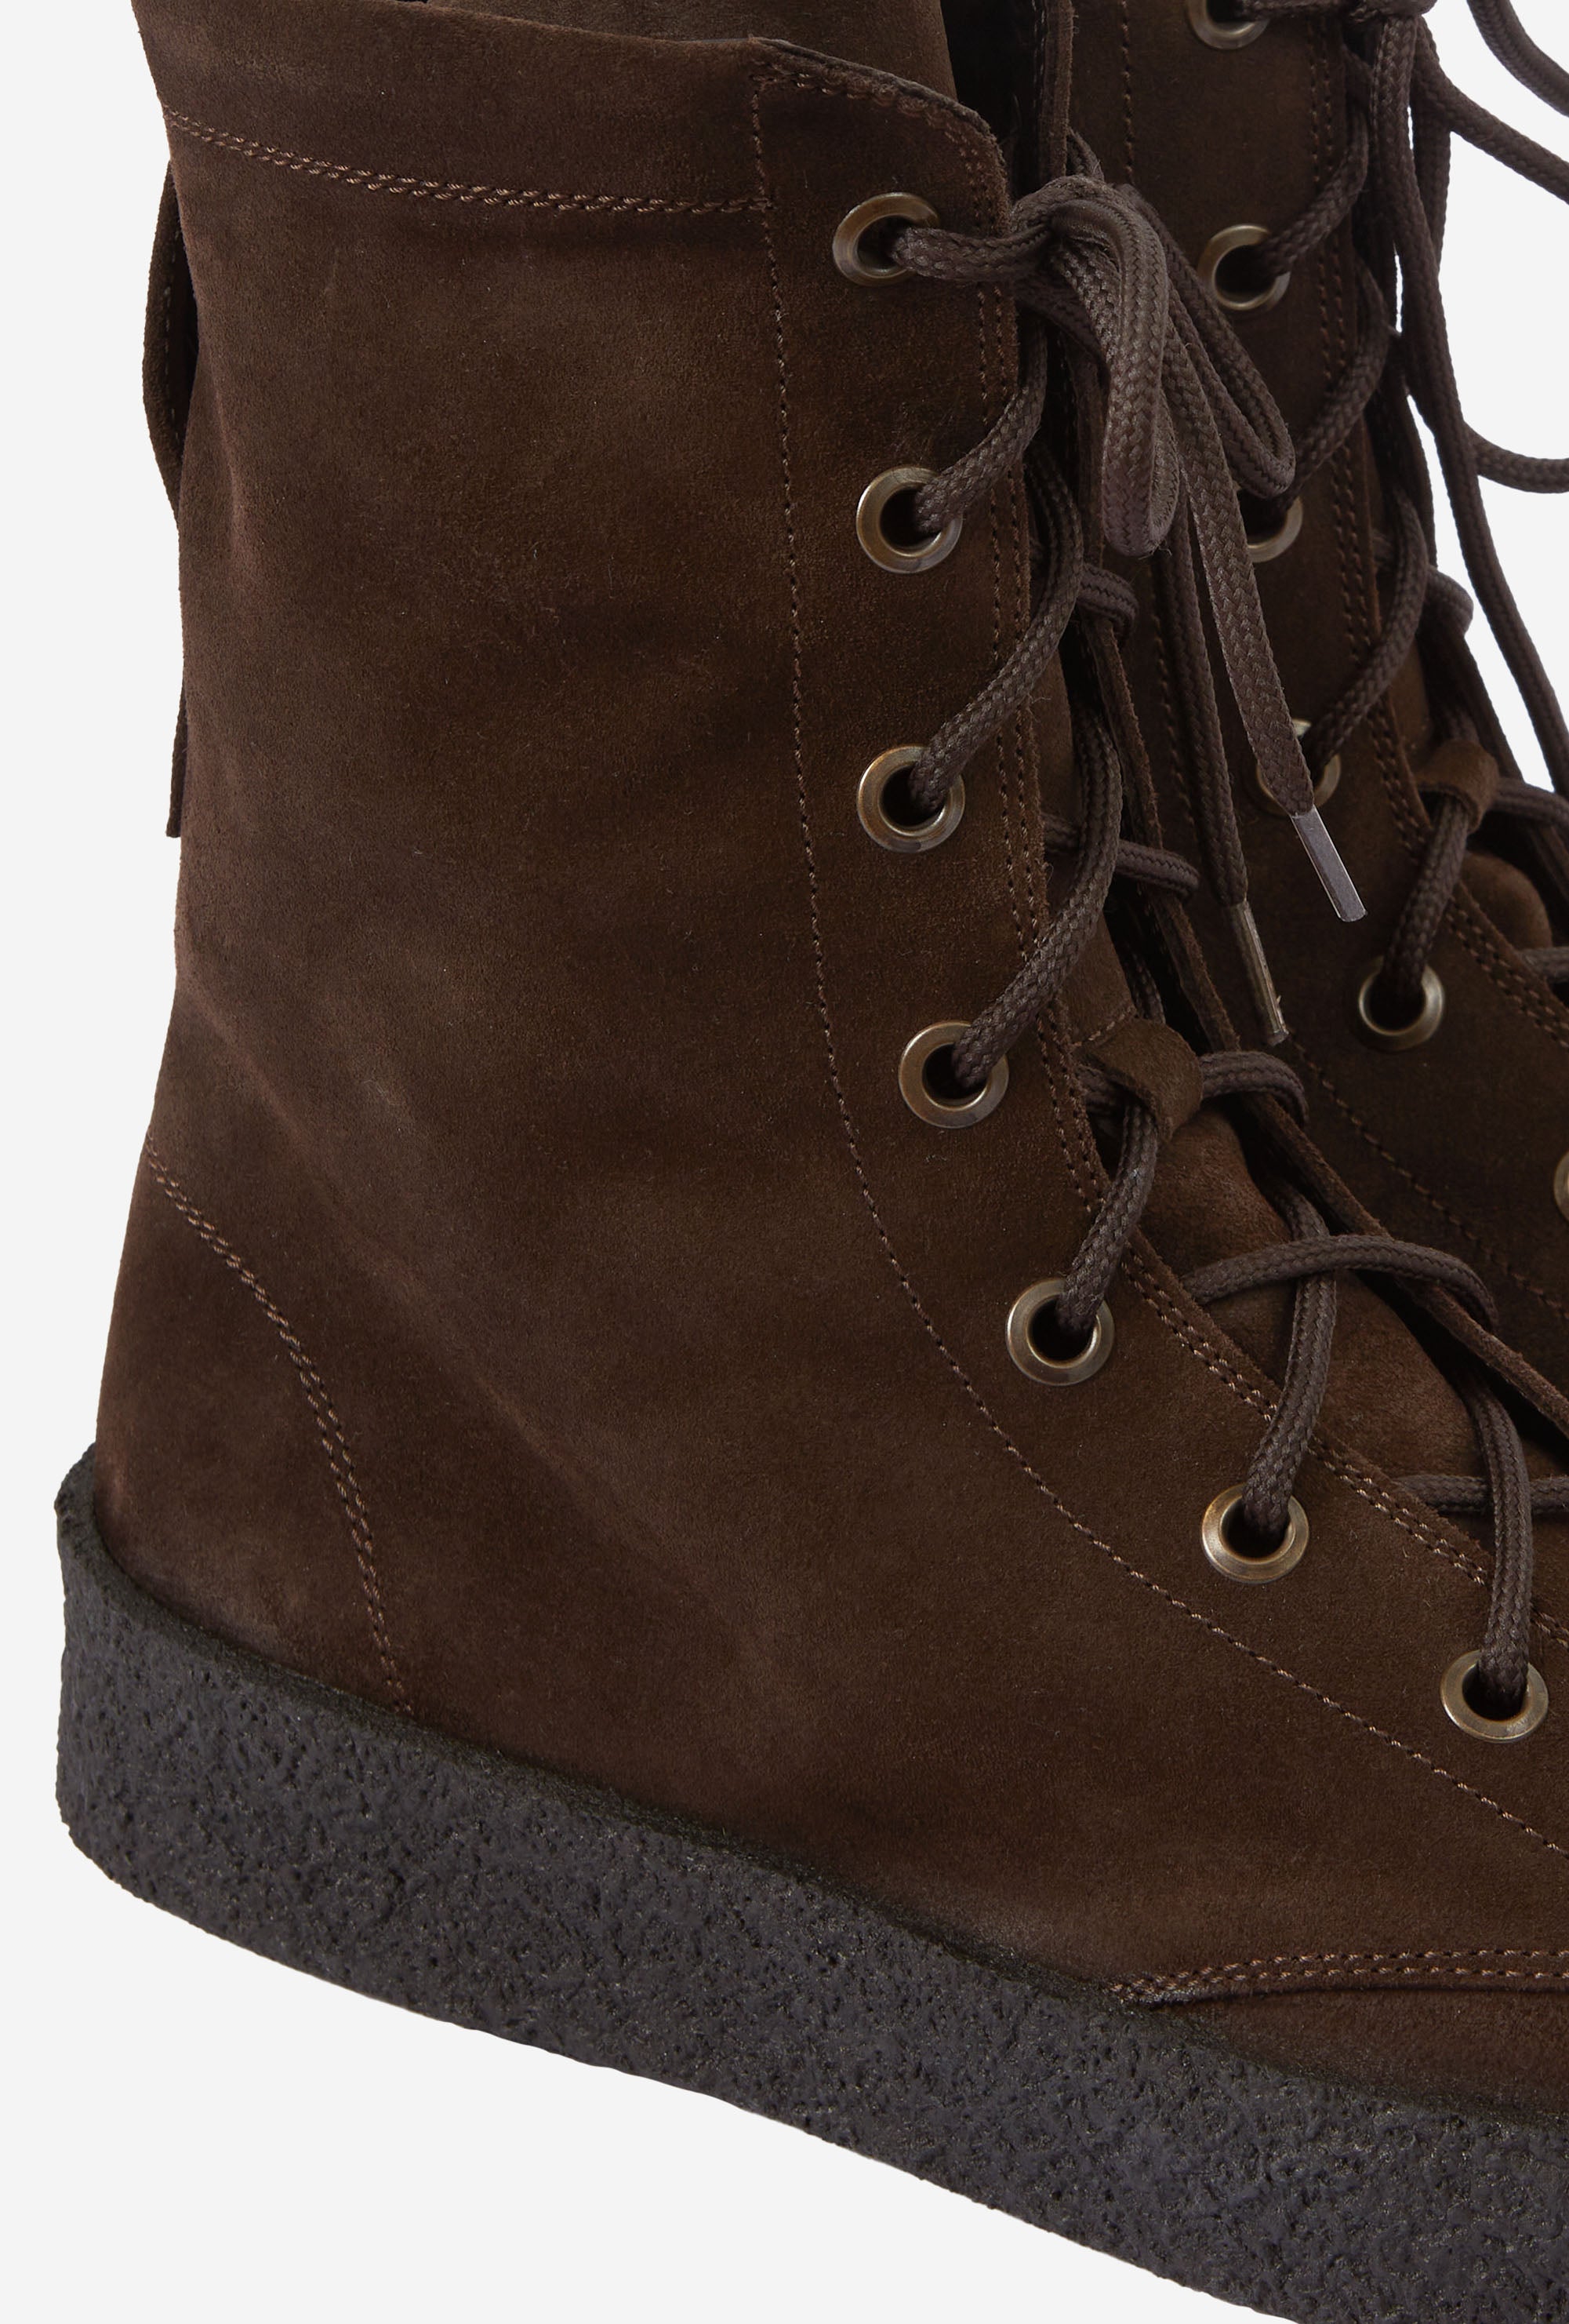 Mountain Boot Crepe Sole Dark Brown Suede